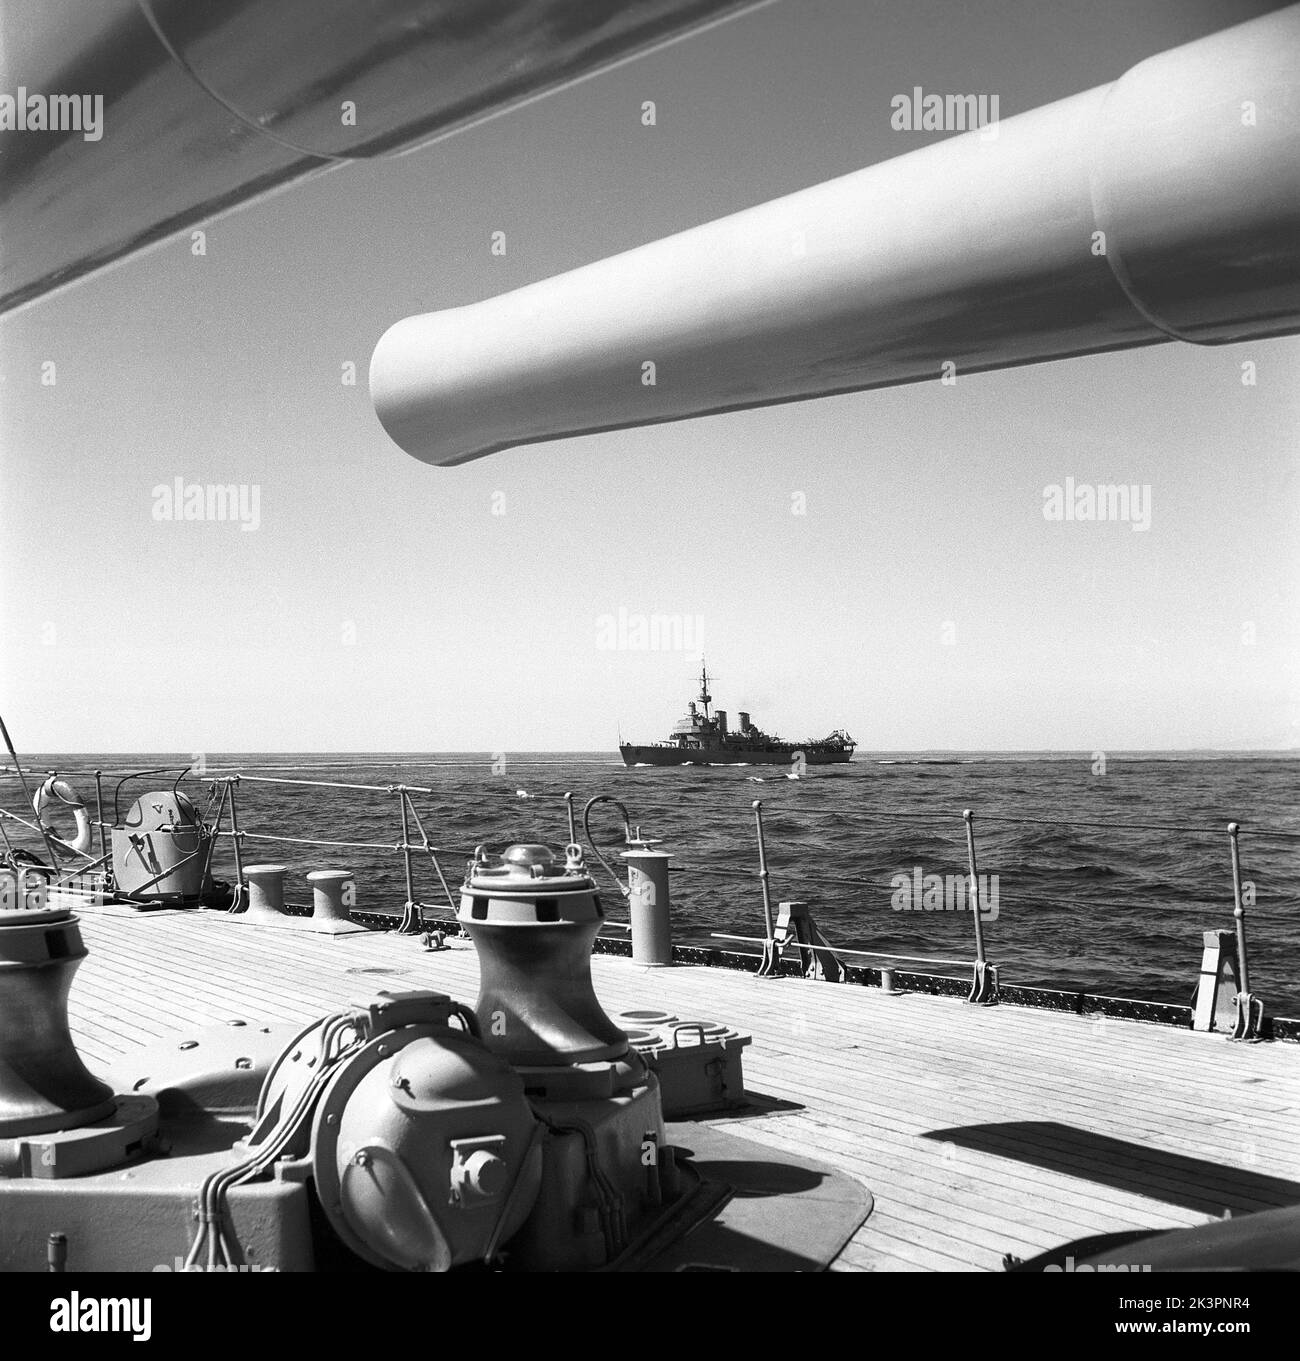 During World war II. The war ship Sverige during navy exercises at sea. The front cannons are visible with a swedish warships cruising on the side. Sweden june 1940. Kristoffersson ref 141 Stock Photo